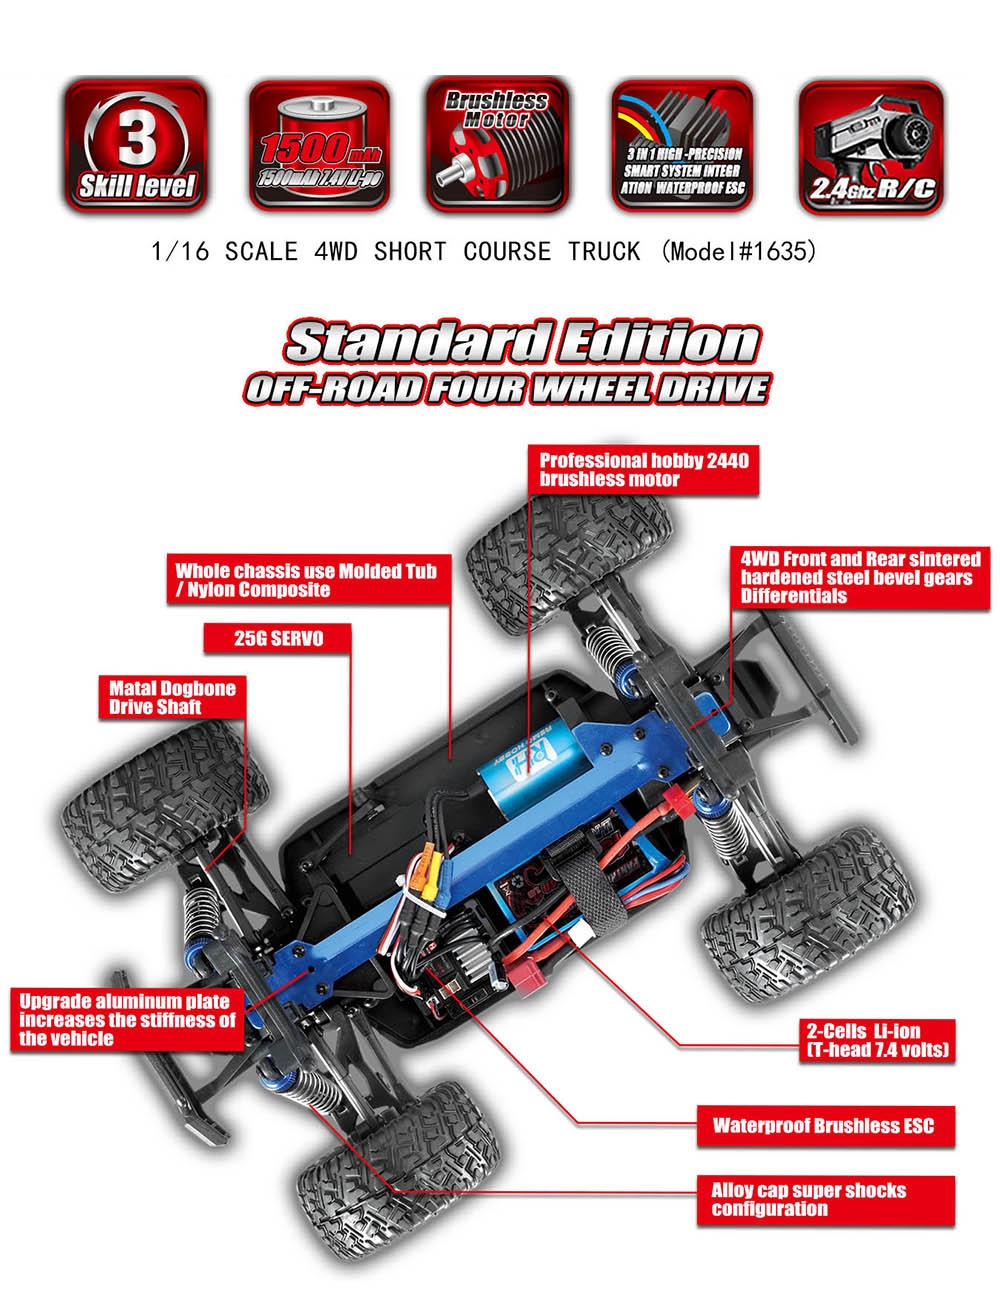 REMO 1635 1/16 2.4G 4WD Waterproof Brushless Off Road Monster Truck RC Car Vehicle Models Blue